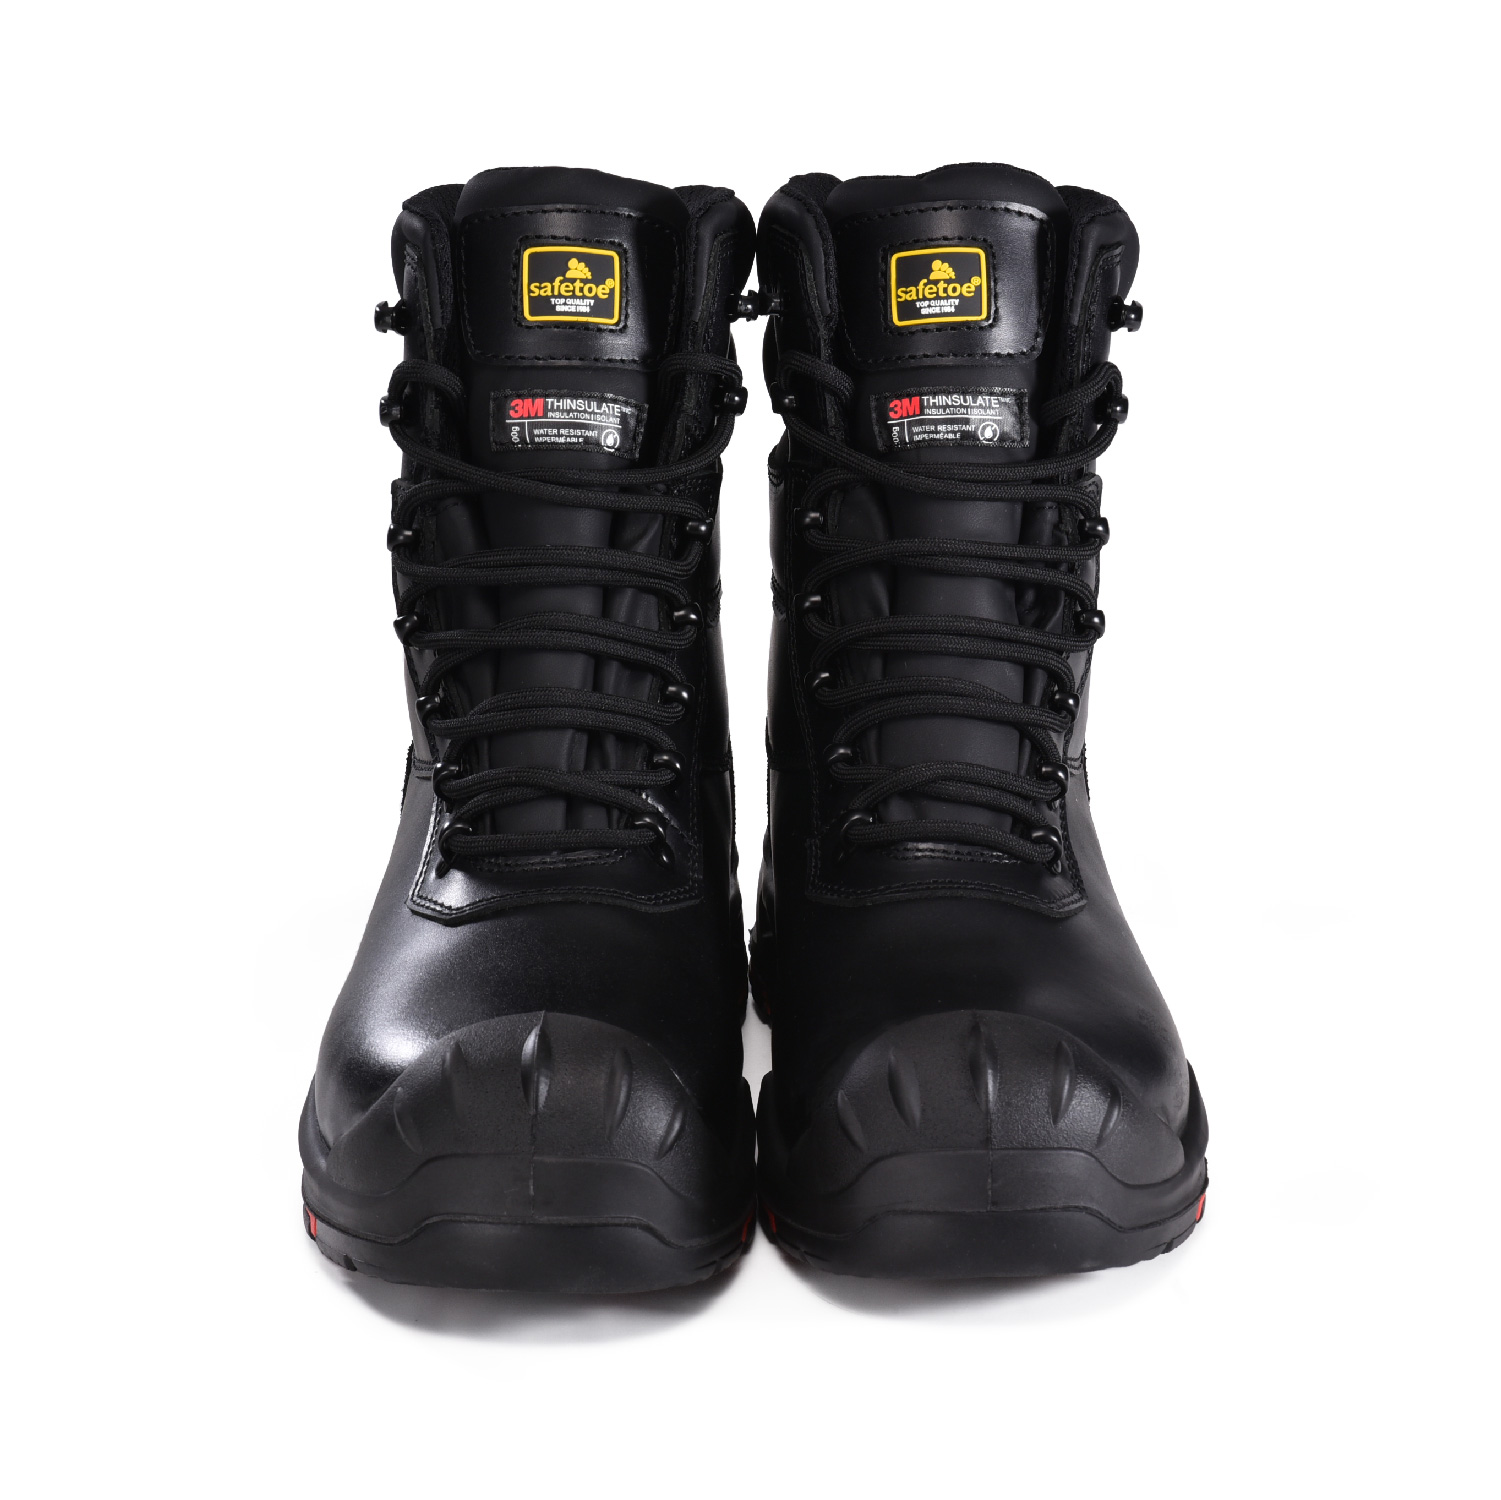 Water Resistant Membrane Lining Work Boots For Men Workers In Extreme Winter H-9552